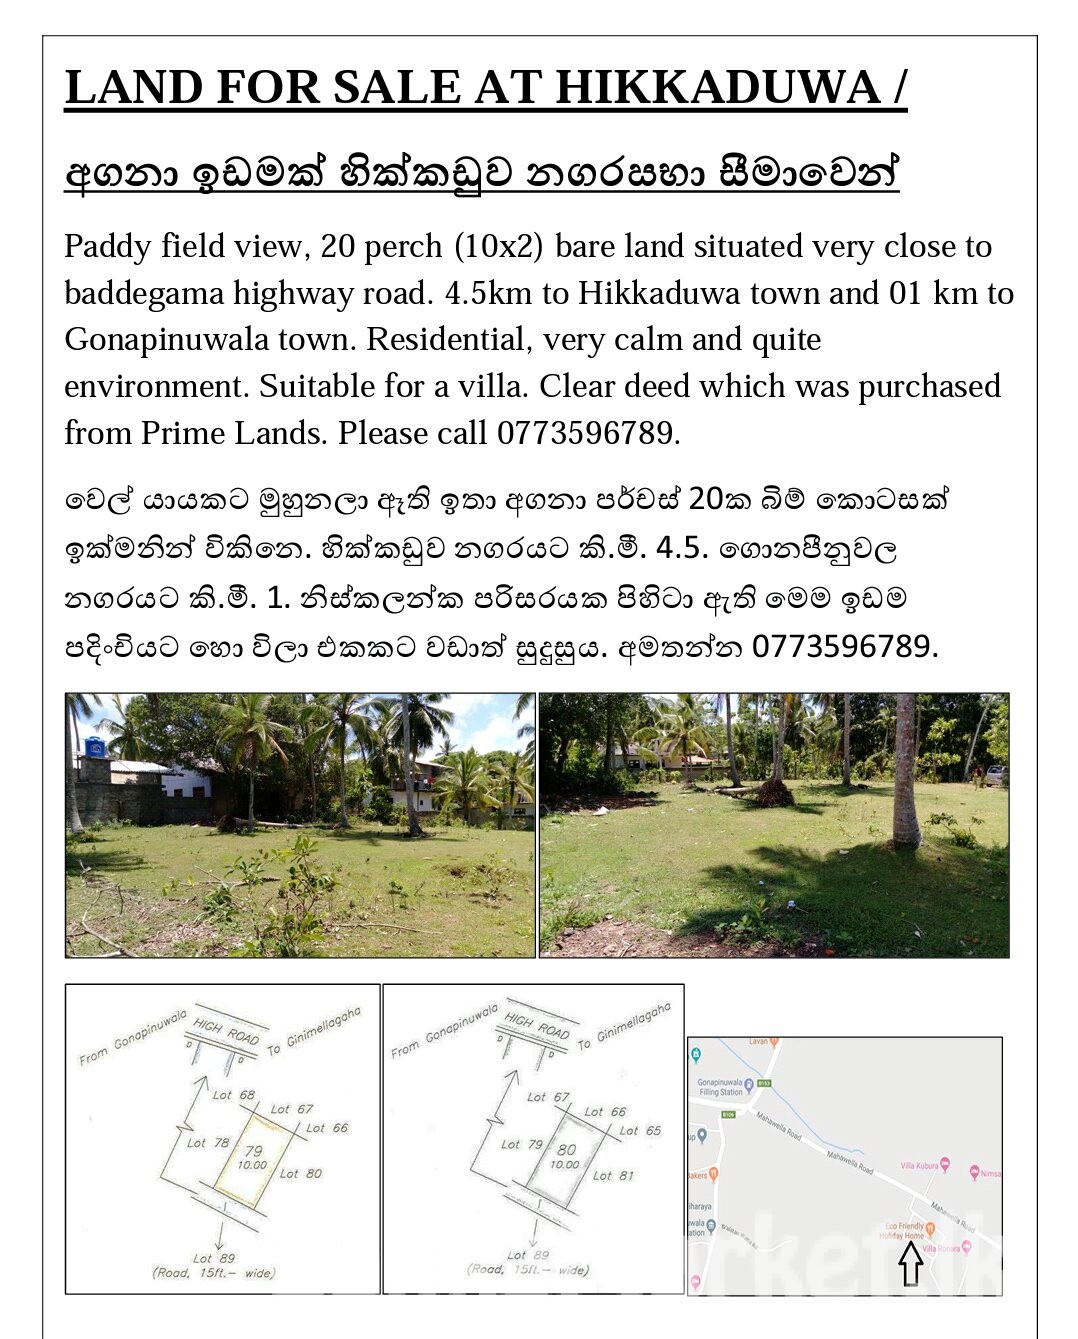 Urgent land sale at Hikkaduwa surrounded by paddy fields.